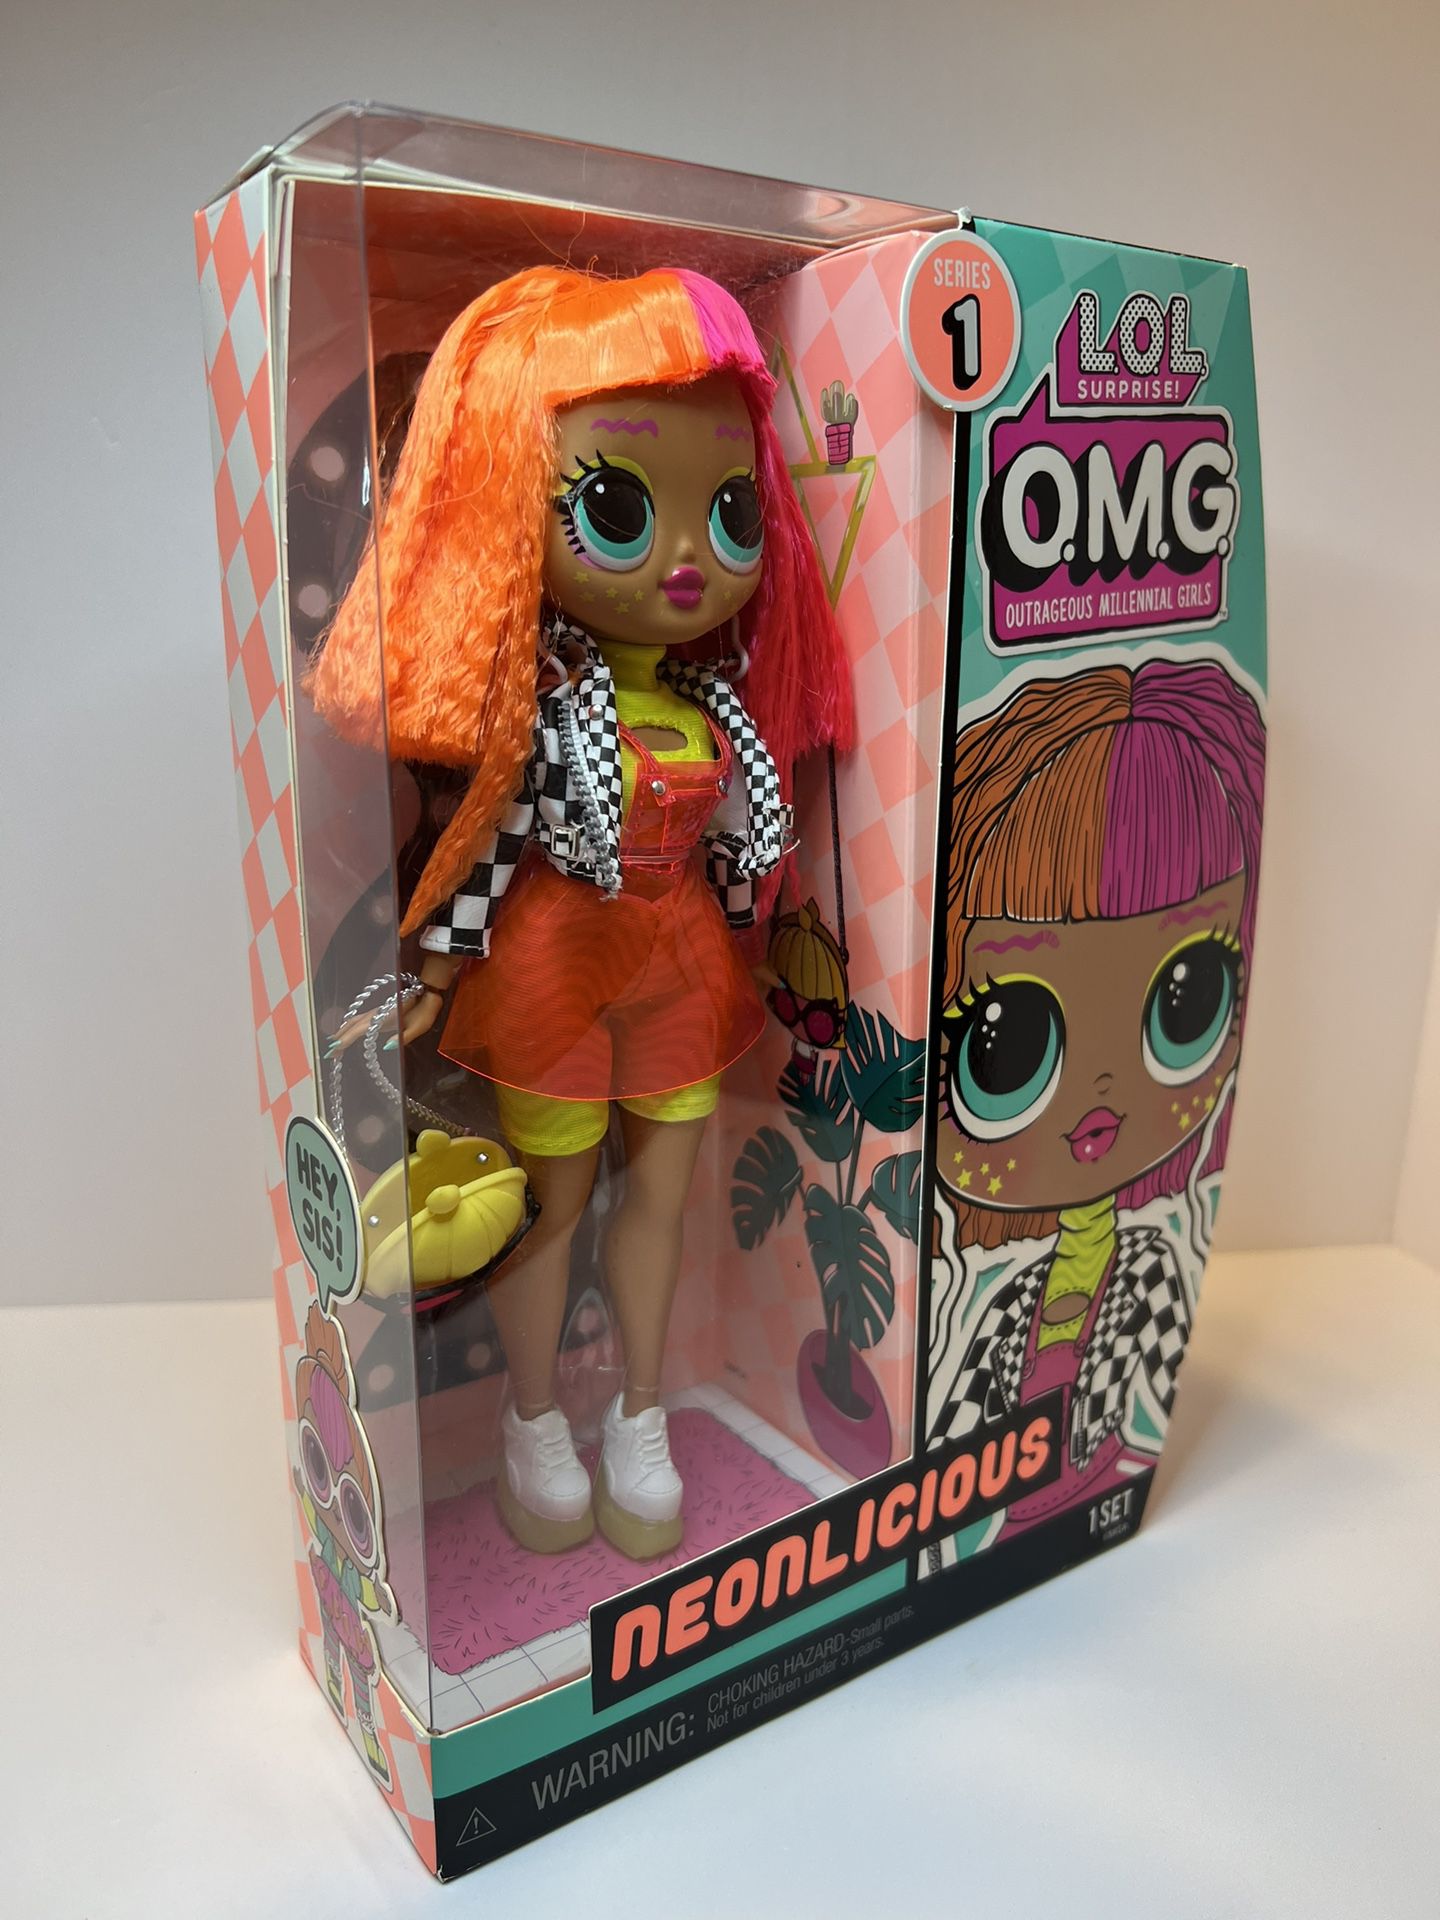 LOL Surprise - Neonlicious - OMG Series 1 - Outrageous Doll